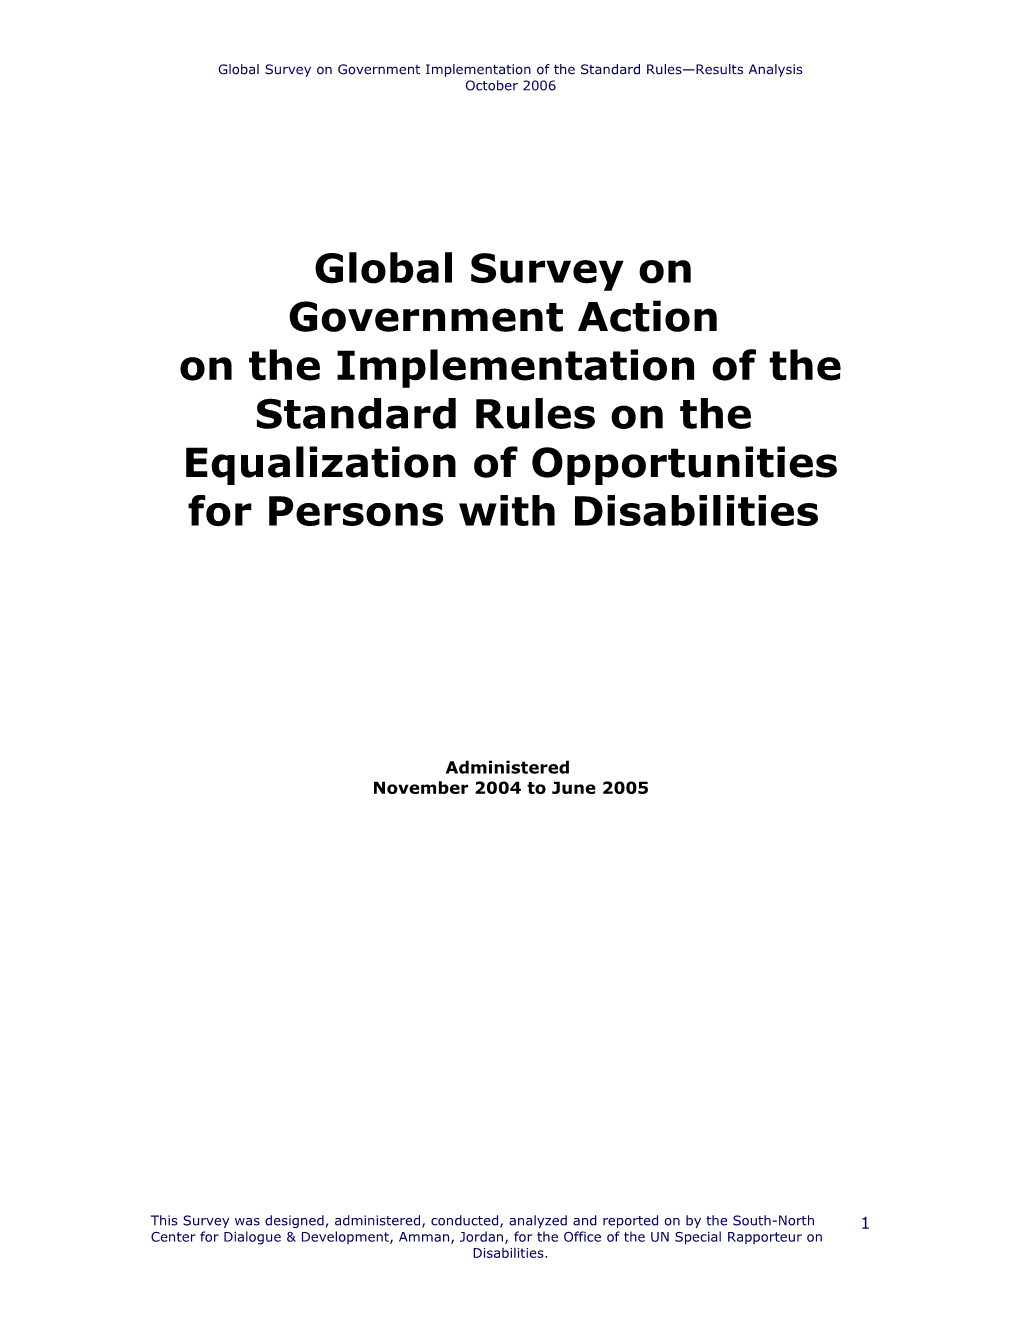 Global Survey on Government Implementation of the Standard Rules Results Analysis